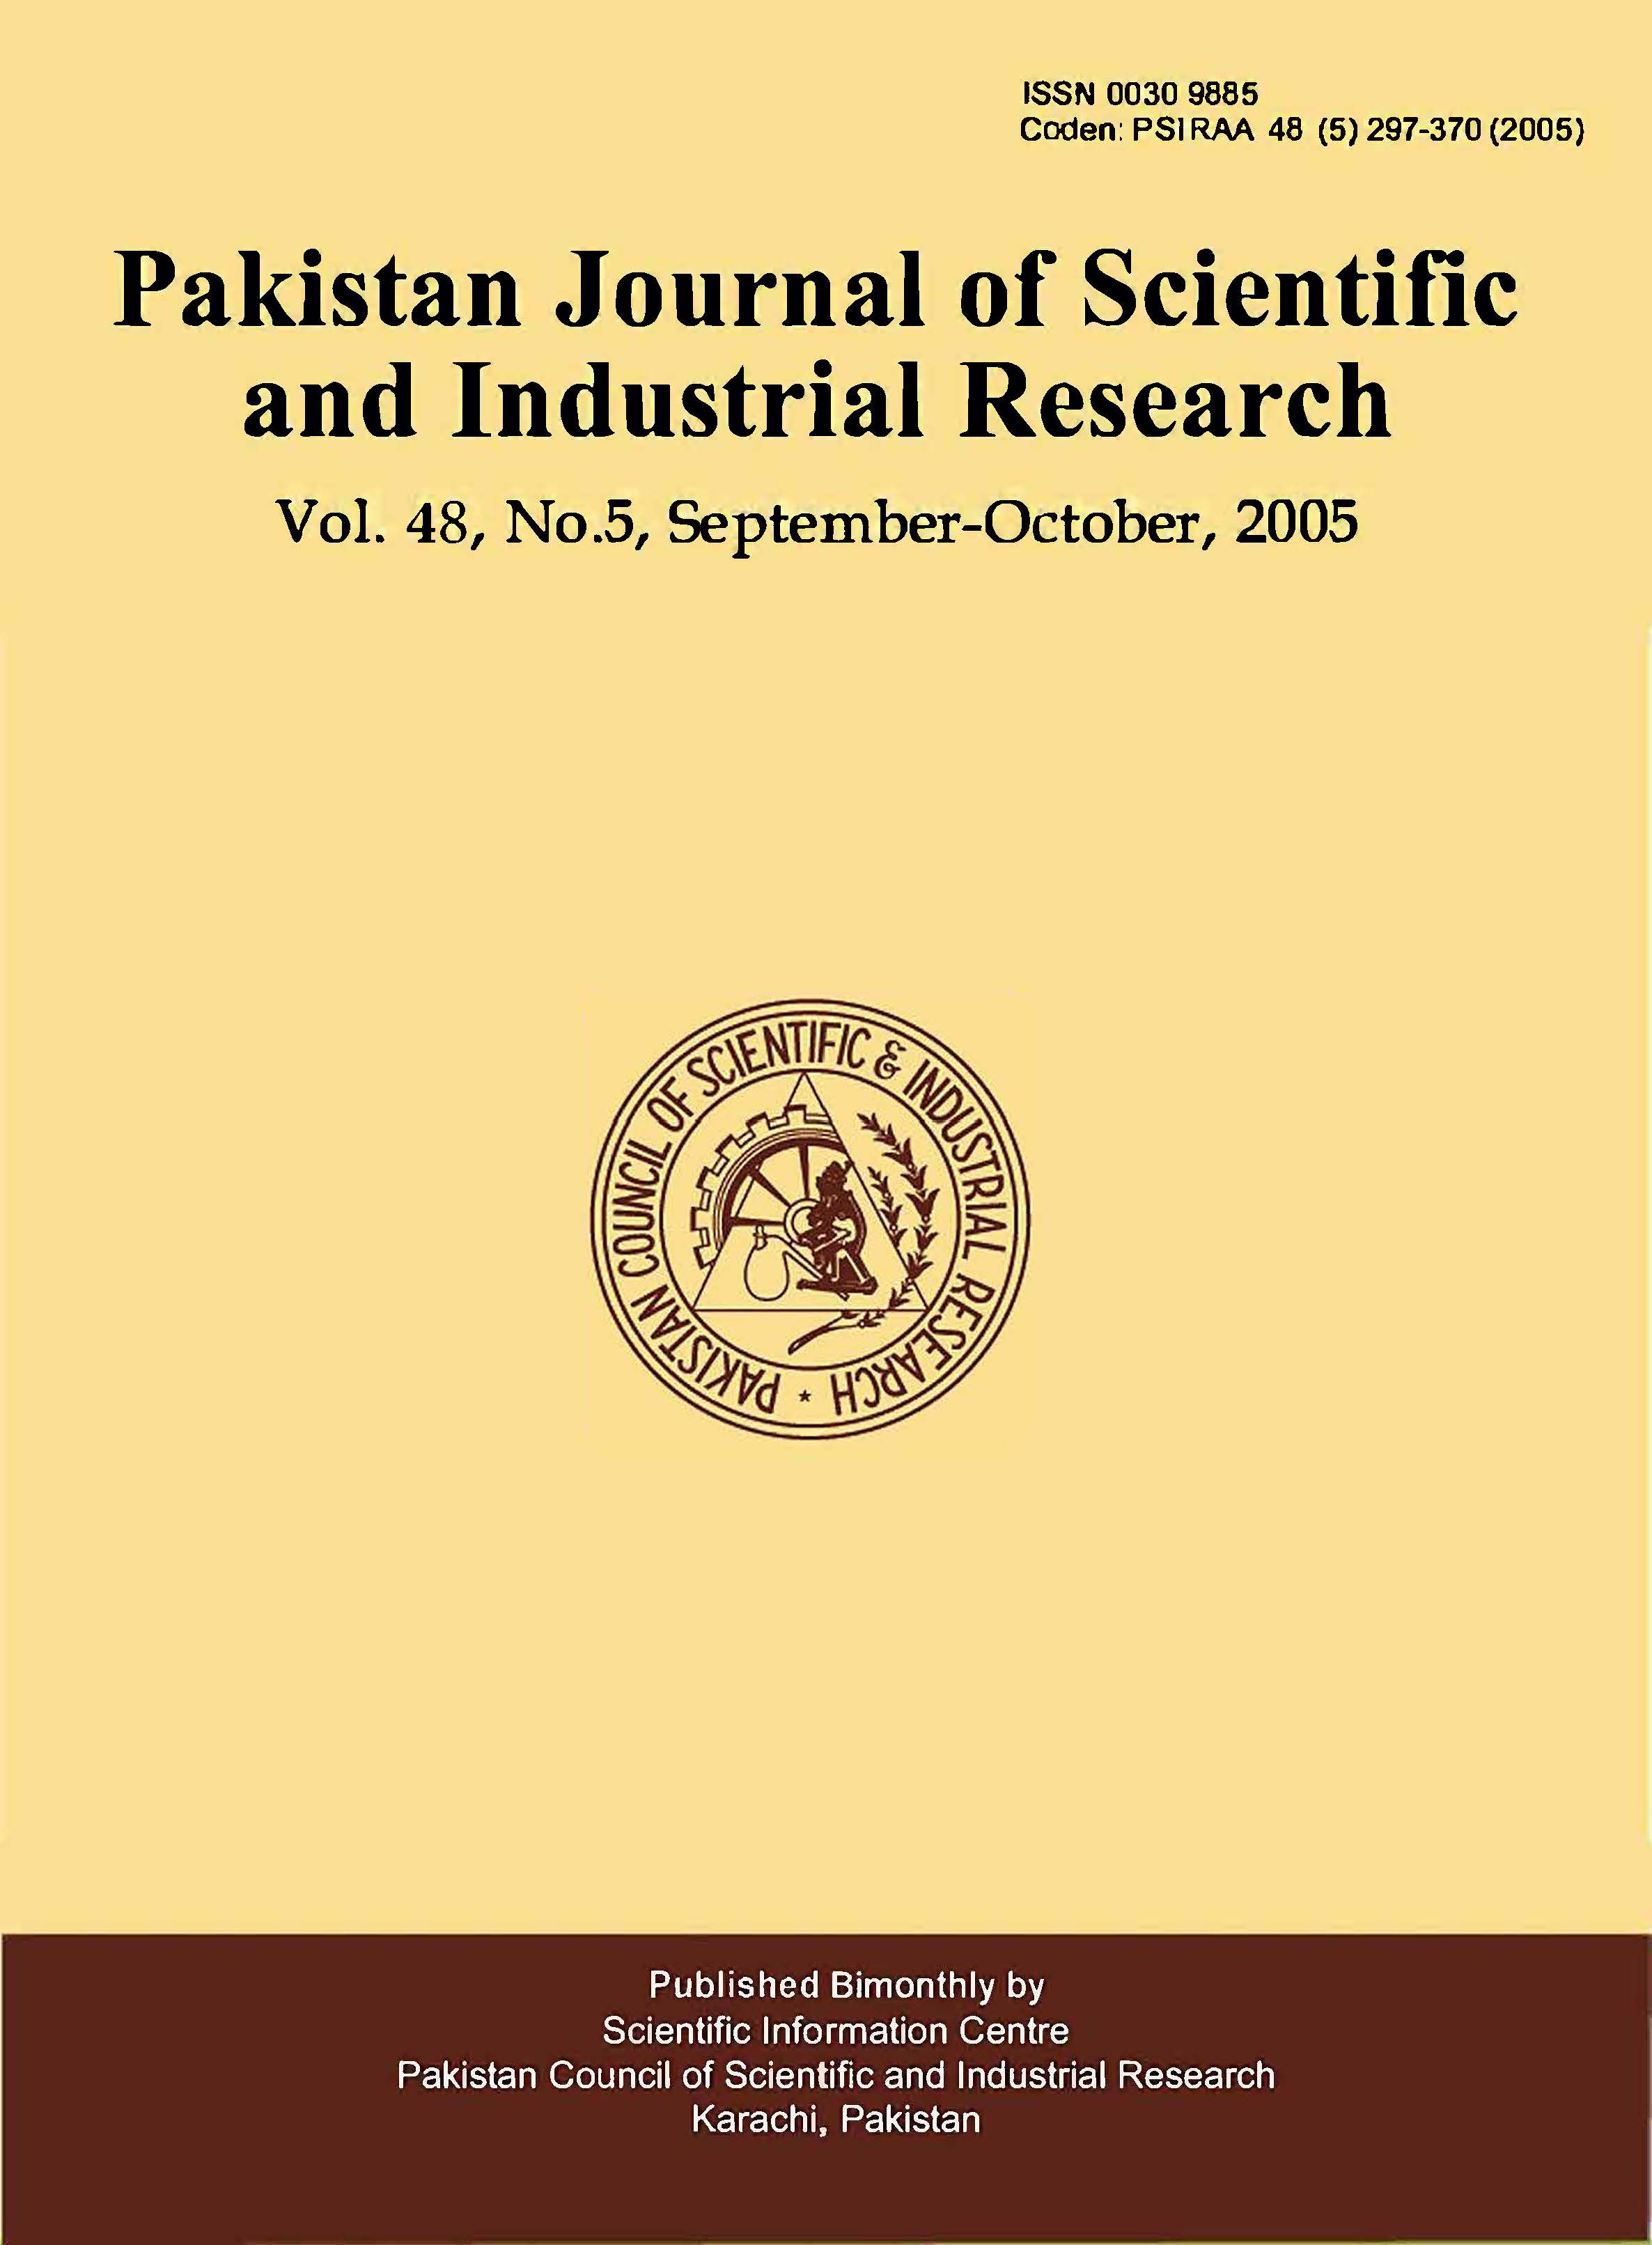 					View Vol. 48 No. 5 (2005): Pakistan Journal of Scientific and Industrial Research
				